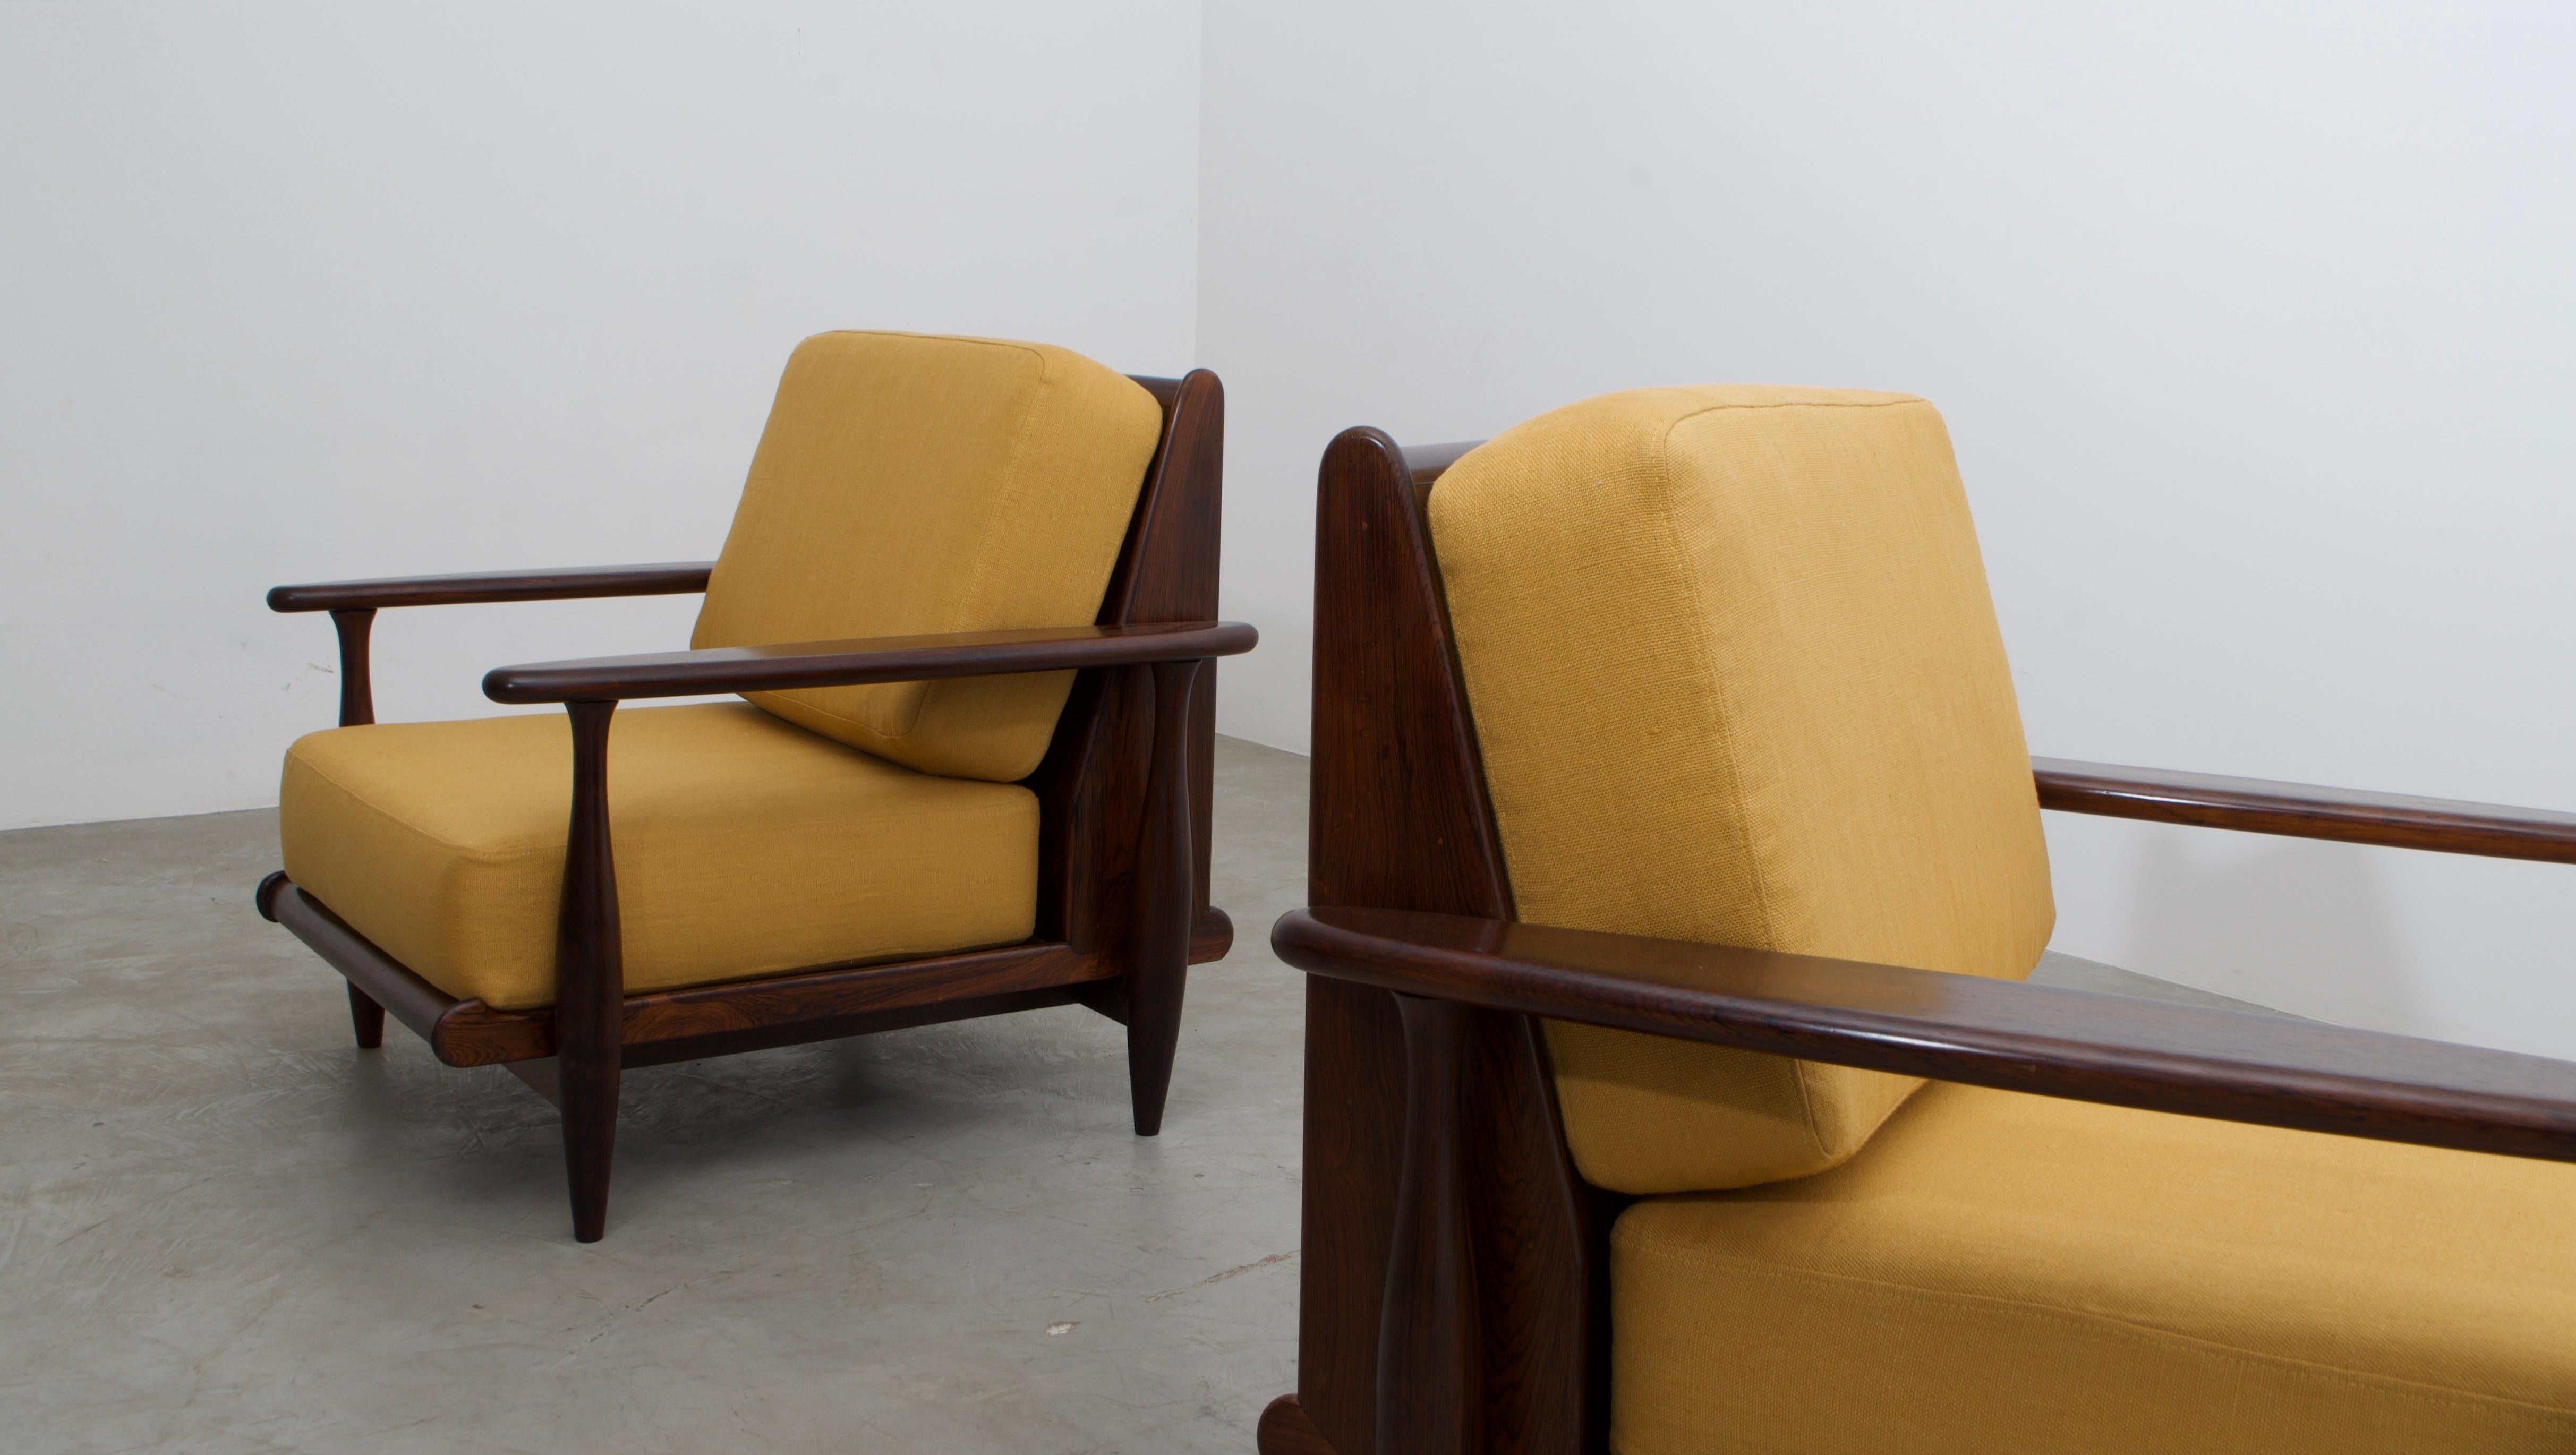 Fabric Pair of Lounge Chairs by Liceu de Artes e Ofícios, 1960's, Brazilian Mid-Century For Sale